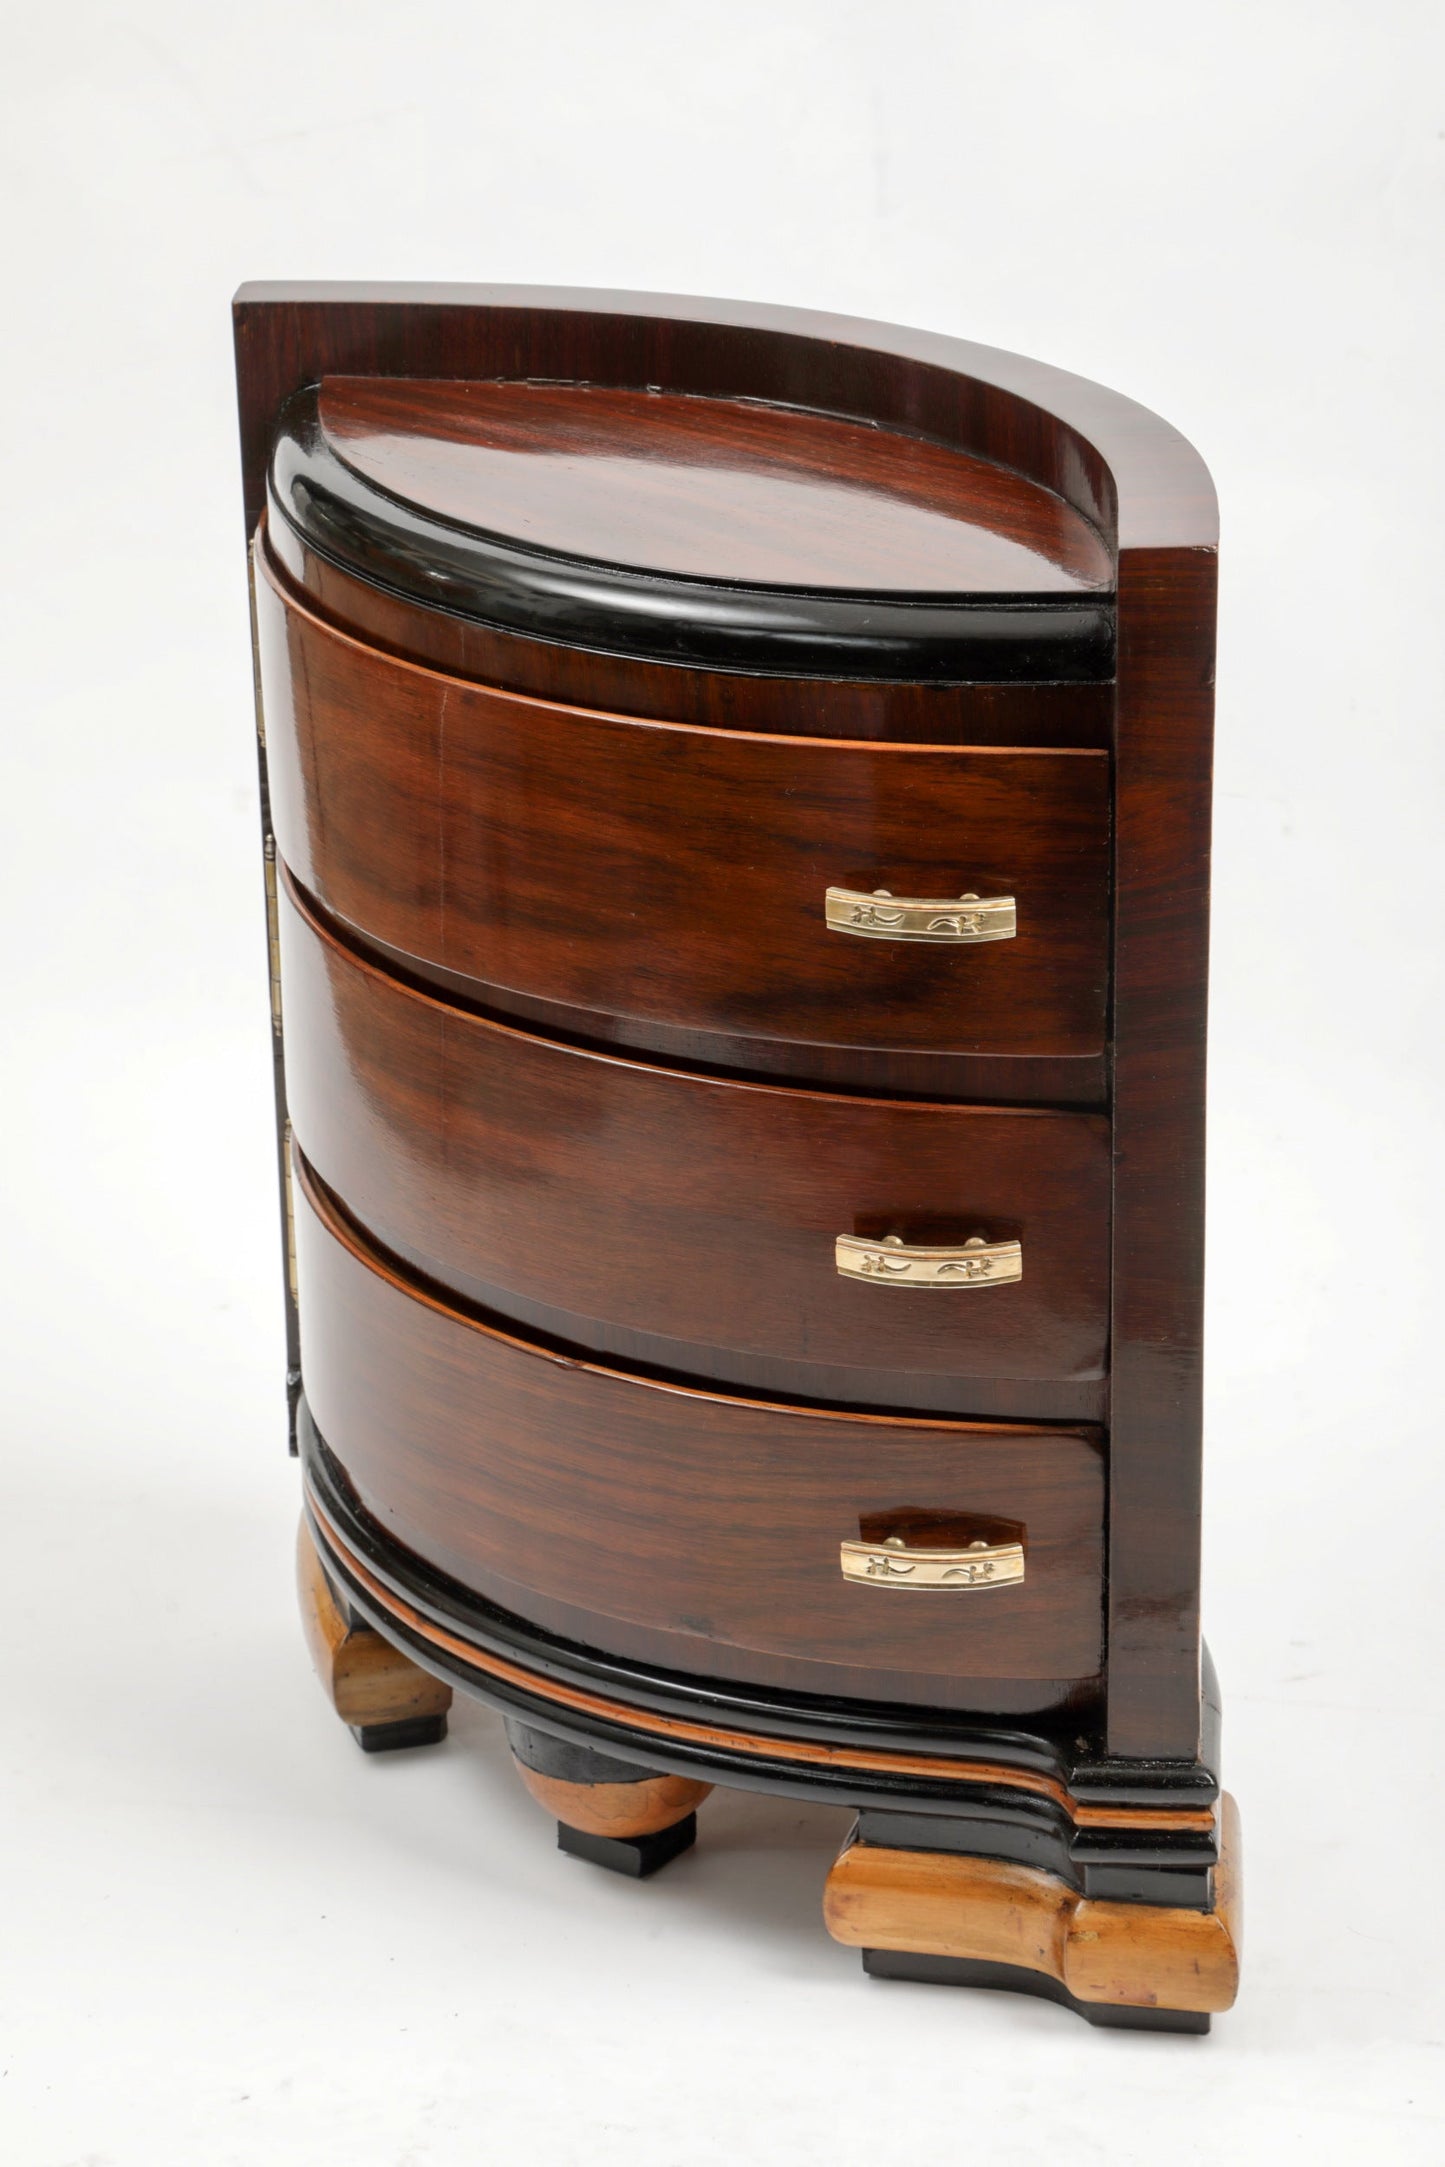 Pair of eye nightstands from the late 1930s